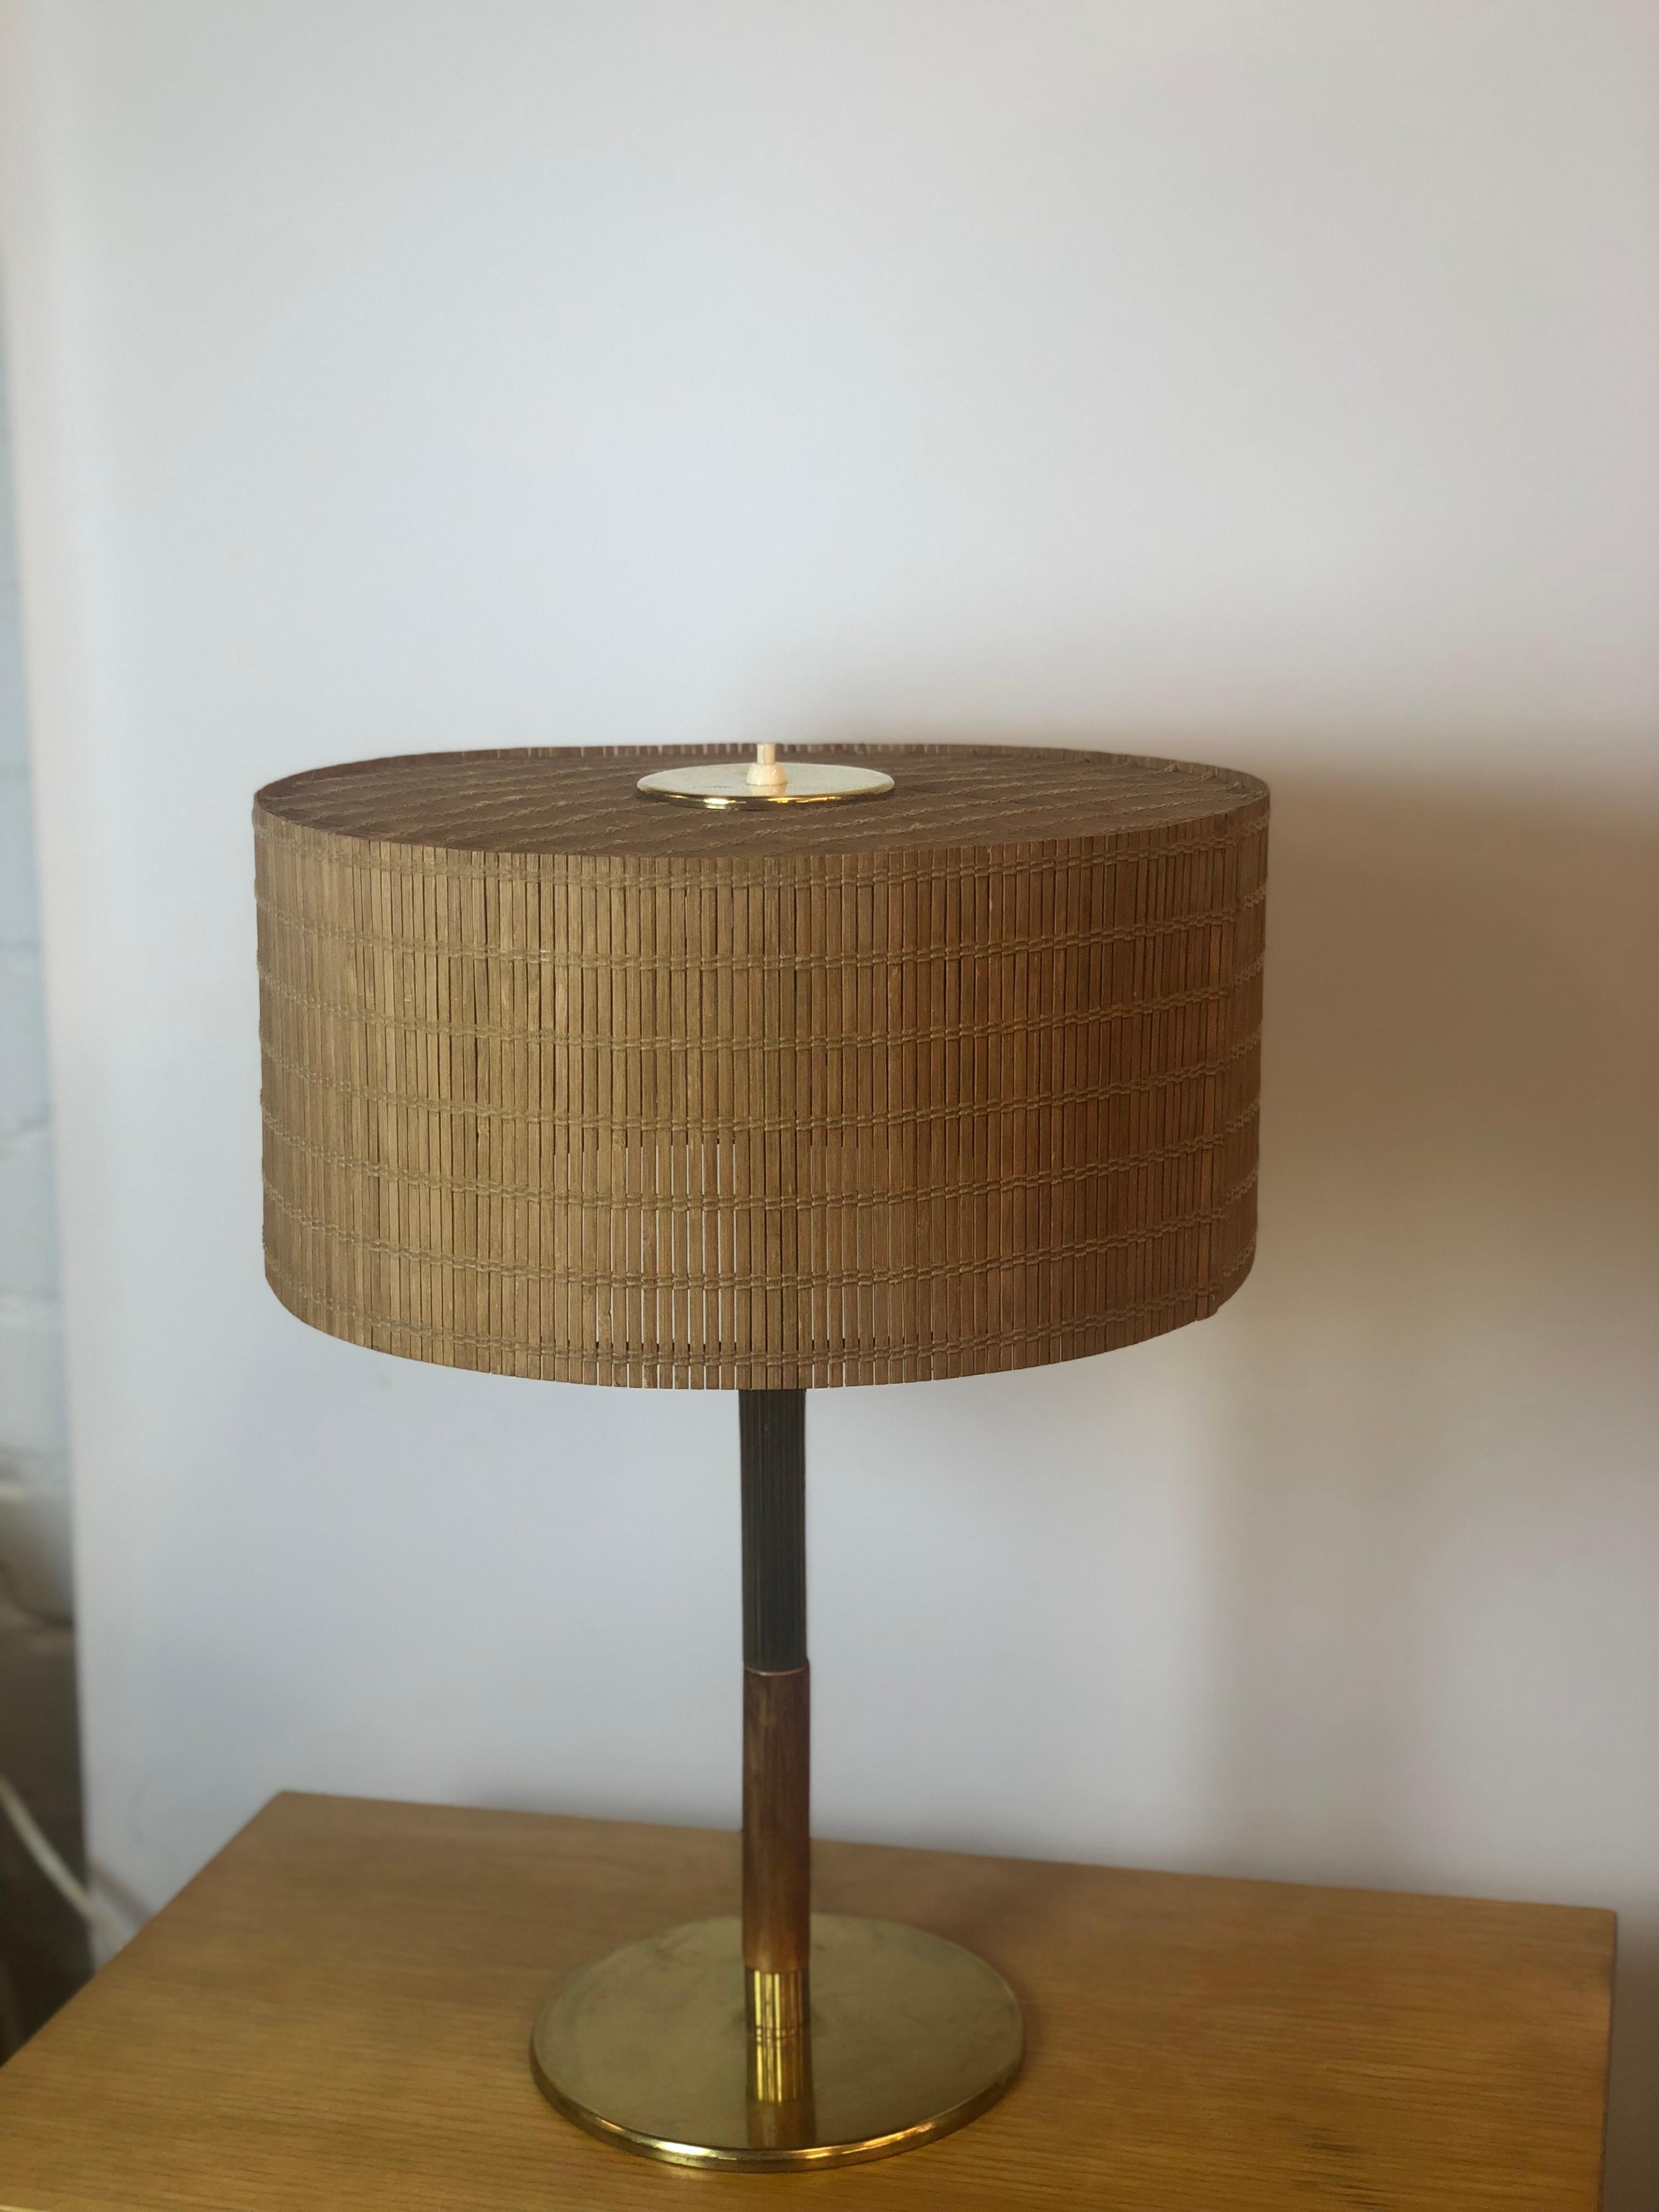 Paavo Tynell table lamp model 5068, manufactured by Taito Oy in the 1950s, excellent condition. One of the more rarely seen Tynell table lamp models. 

As one of the msot important figures in Scandinavian design Paavo Tynell is well renowned all